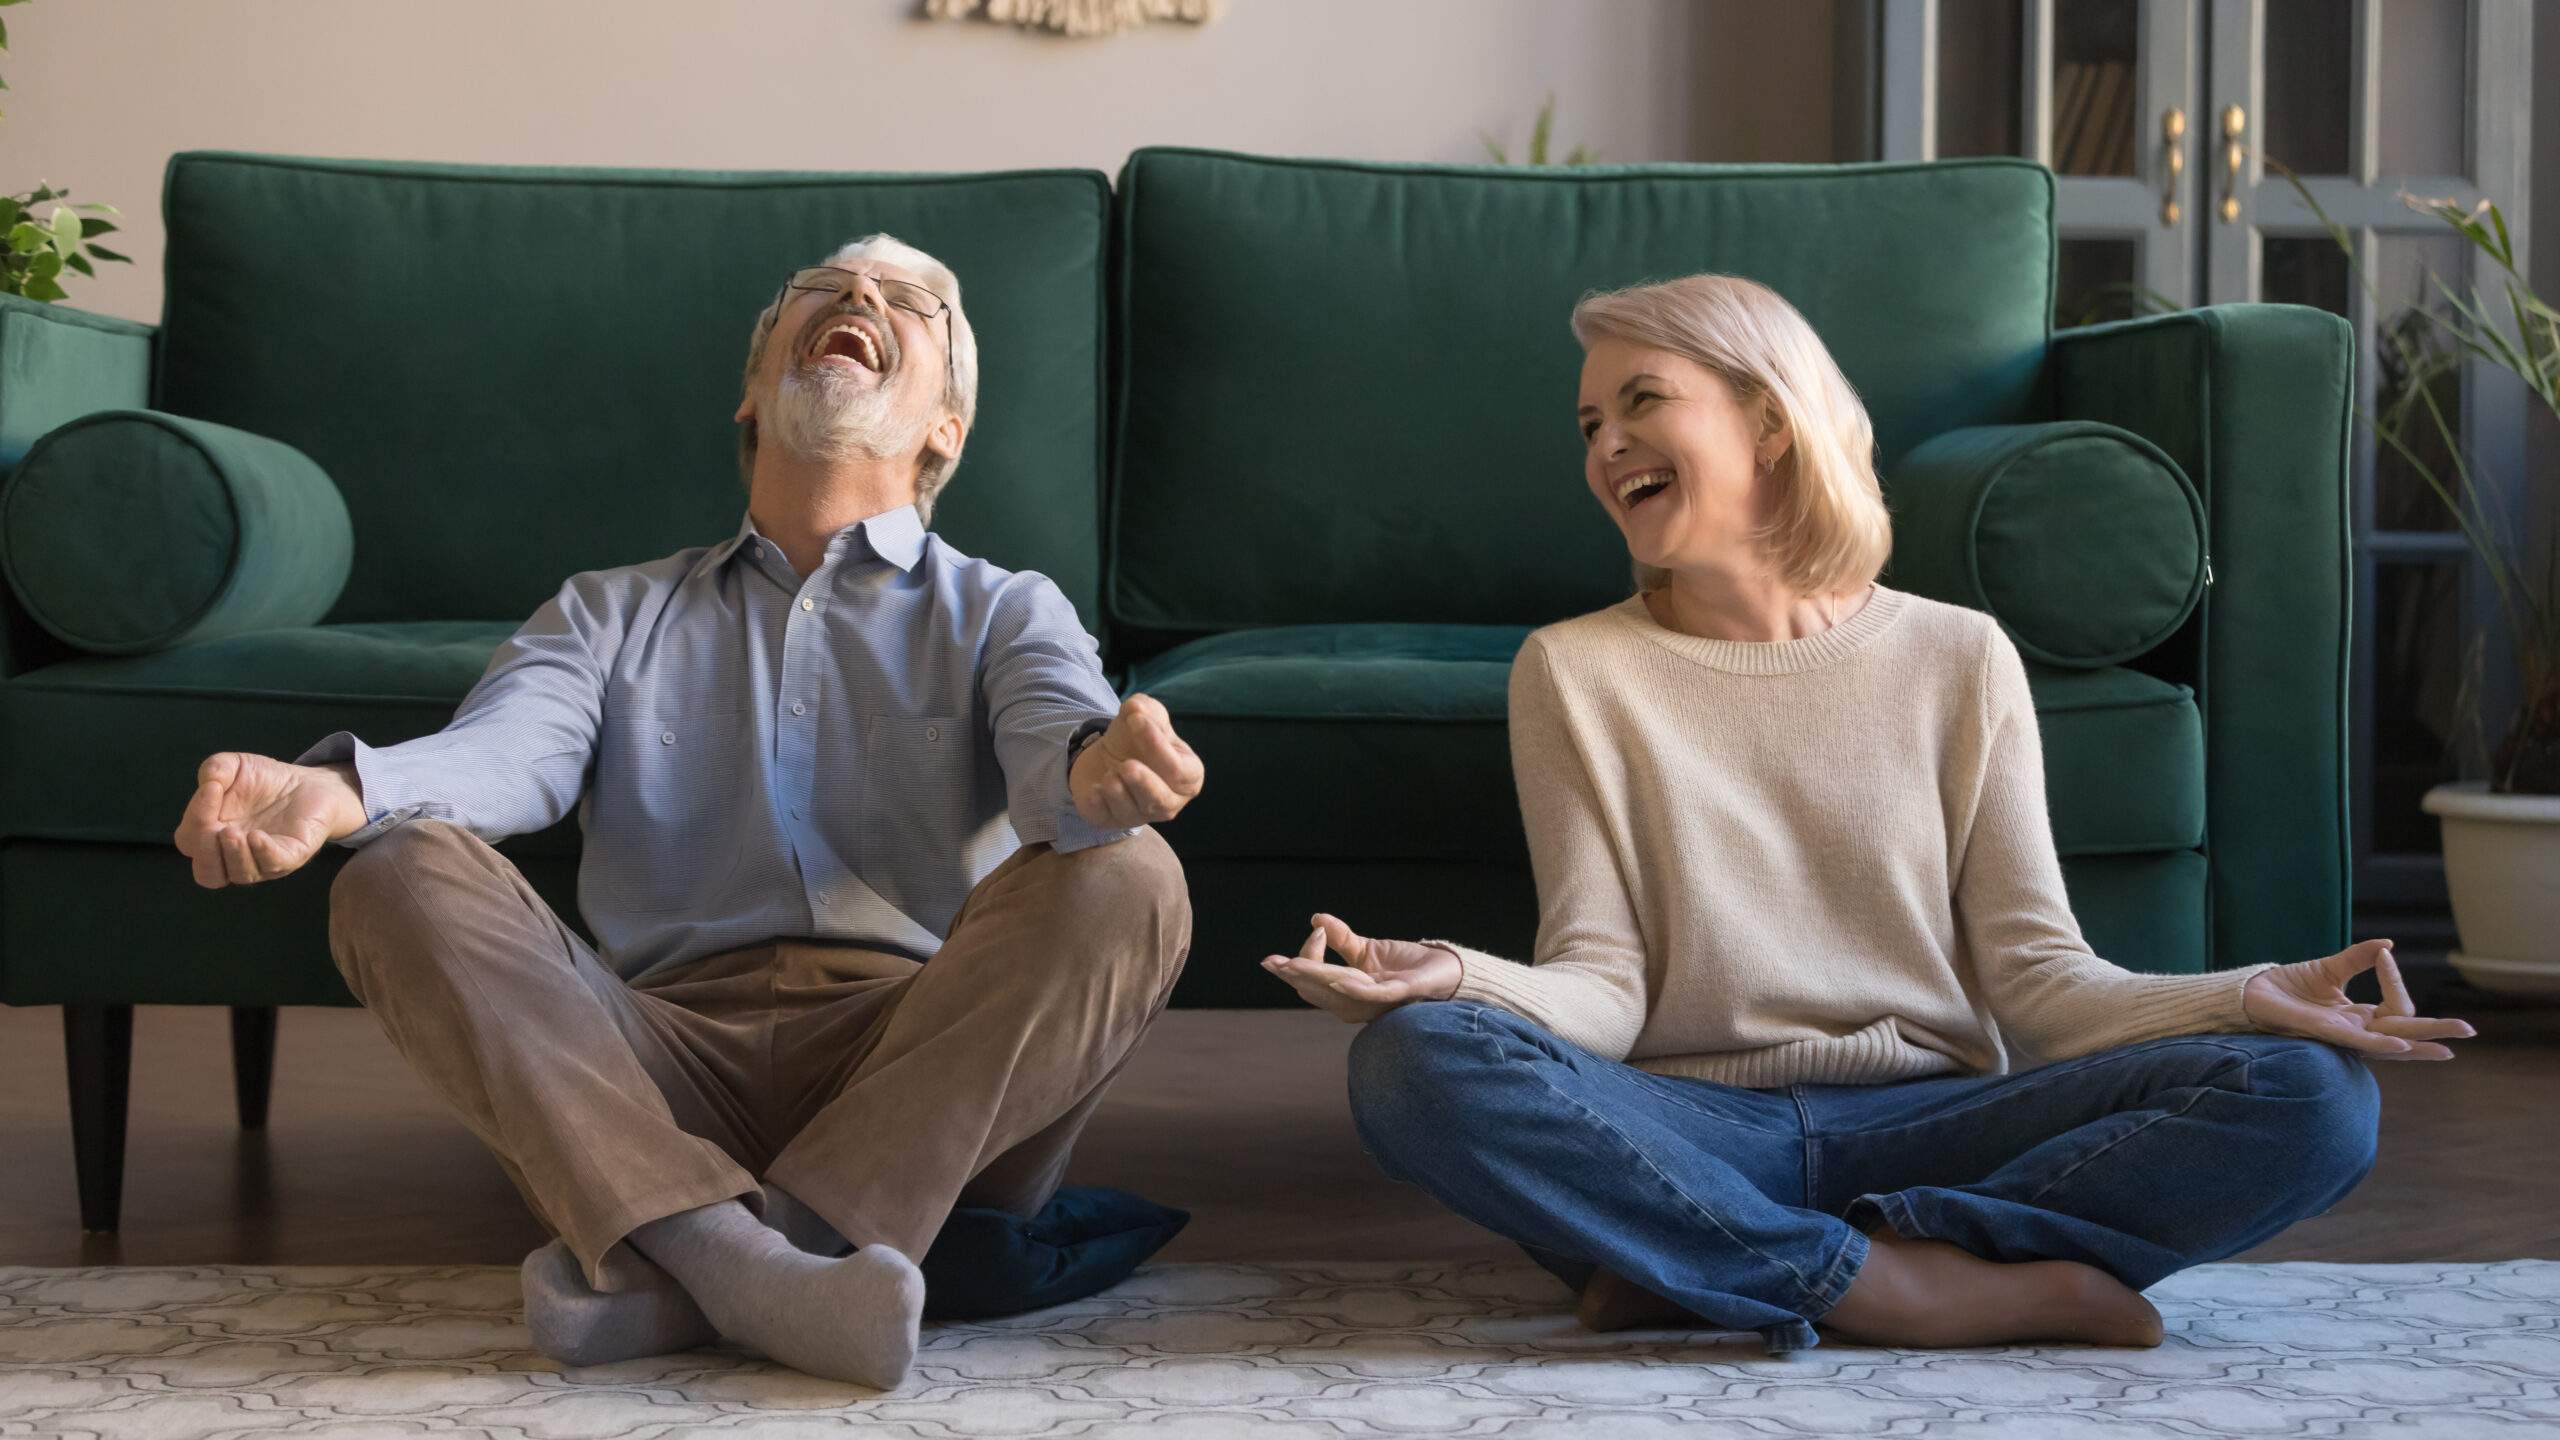 Laughing funny elderly spouses sitting in living room on floor in lotus position practice meditation distracted from yoga exercise joking feels overjoyed, healthy active lifestyle